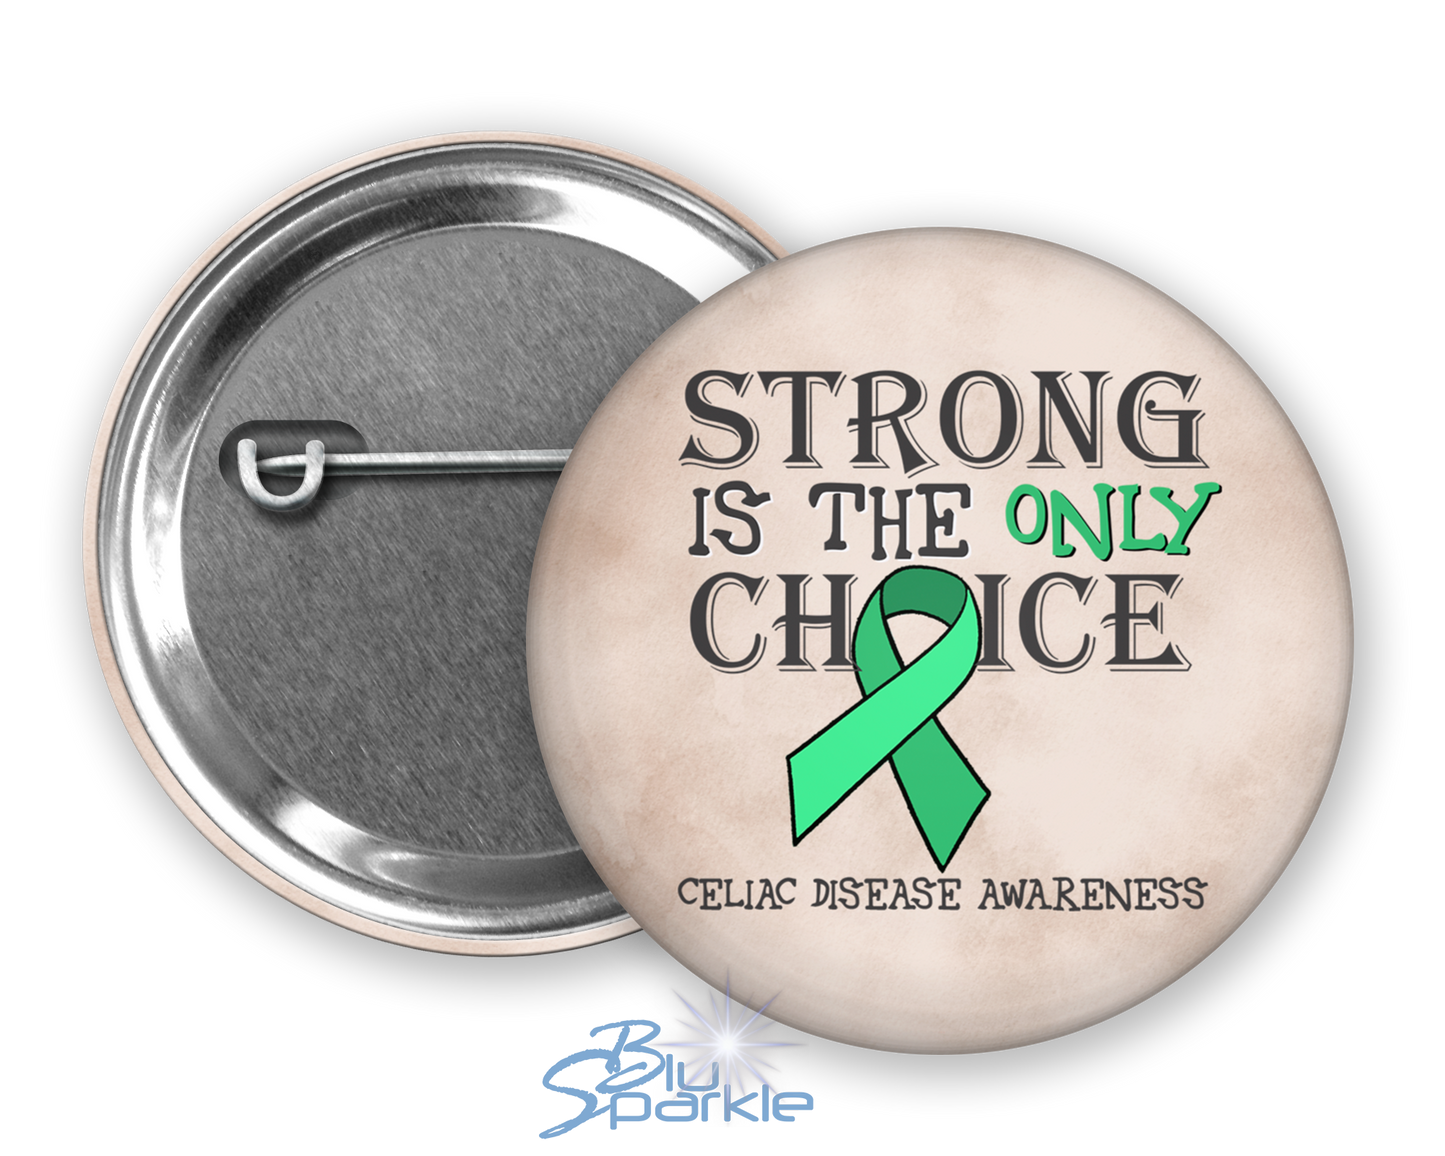 Strong is the Only Choice -Celiac Disease Awareness Pinback Button |x|